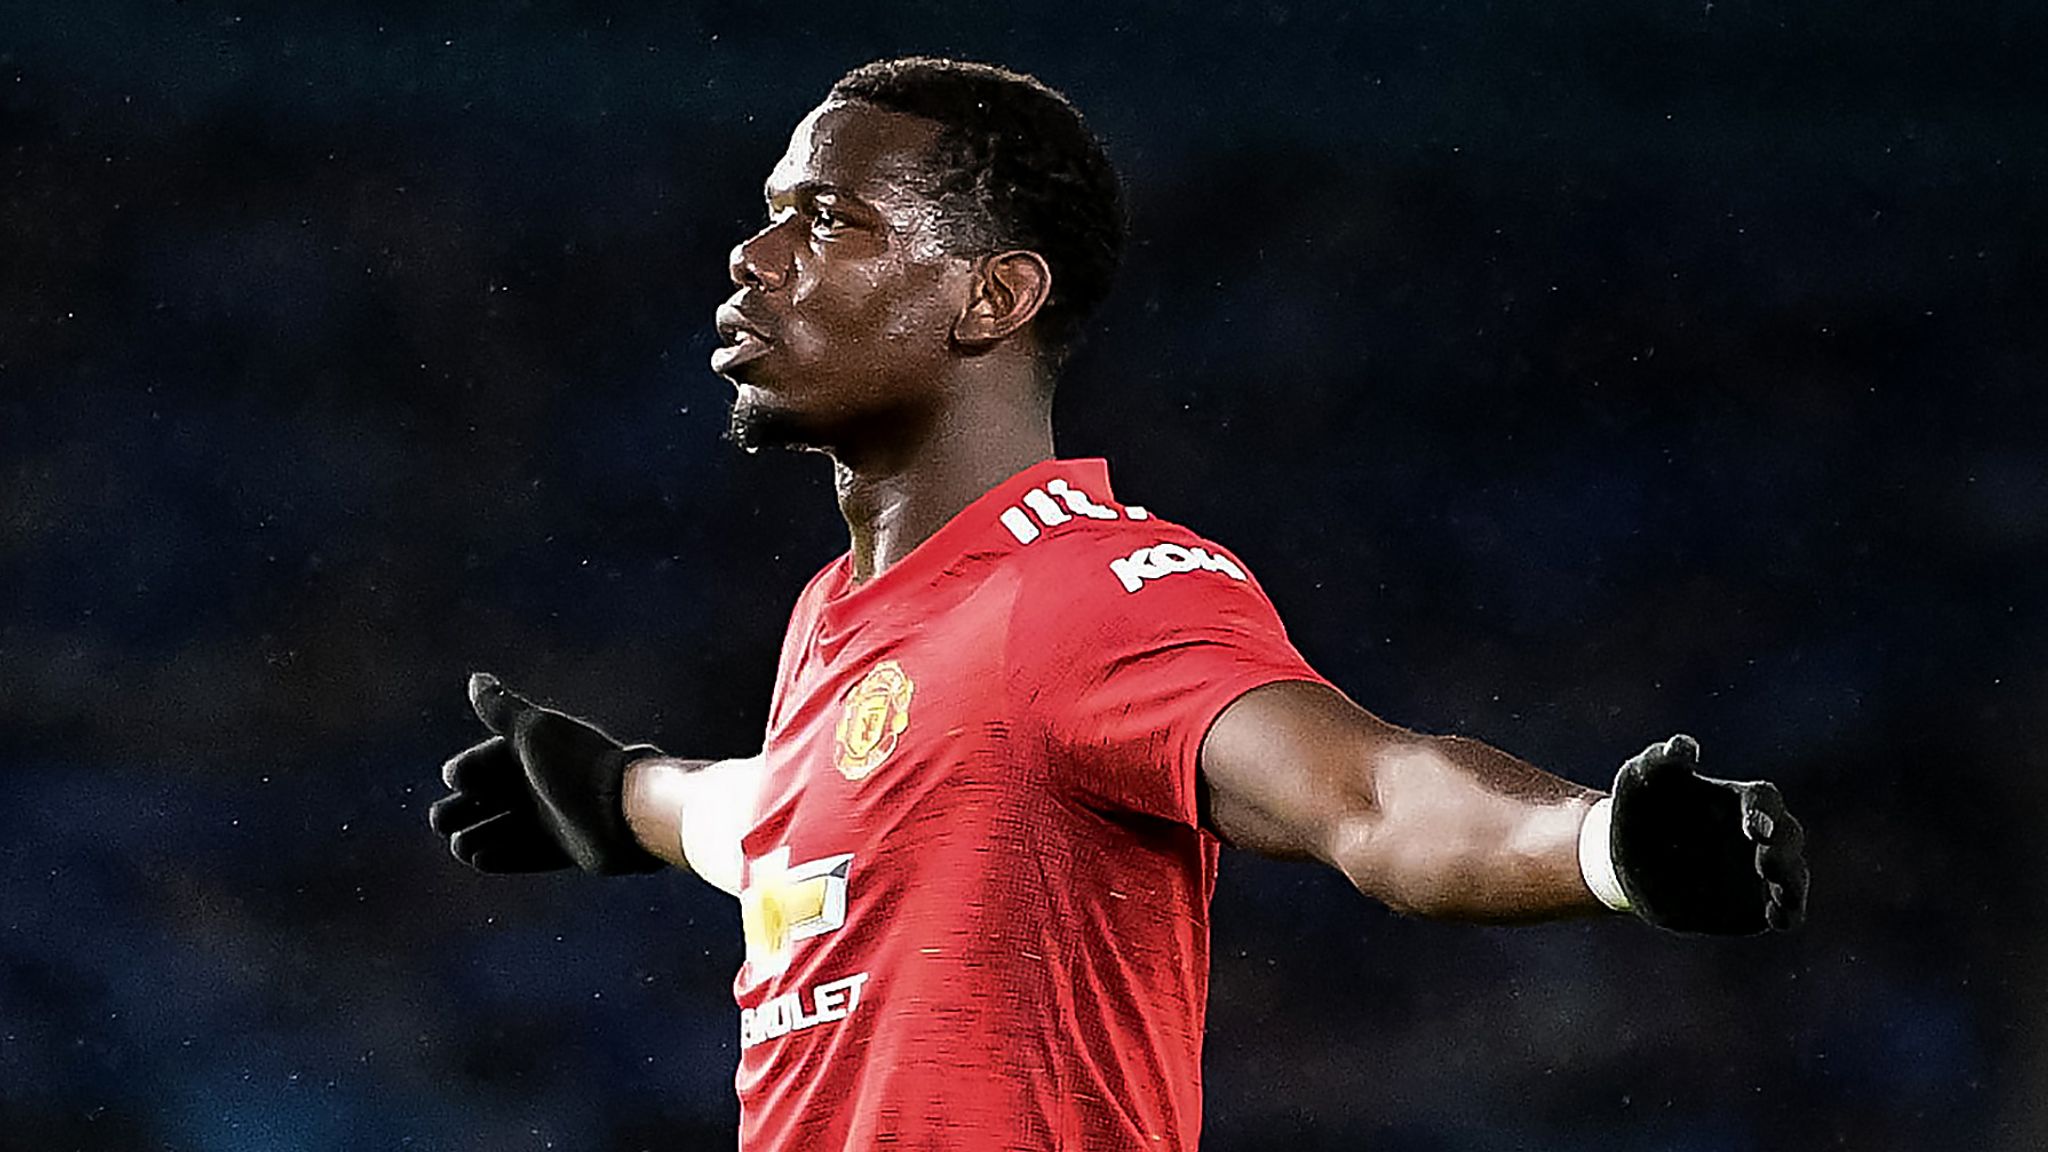 Man Utd's Paul Pogba: My dream is to play for Real Madrid | Football News | Sky Sports